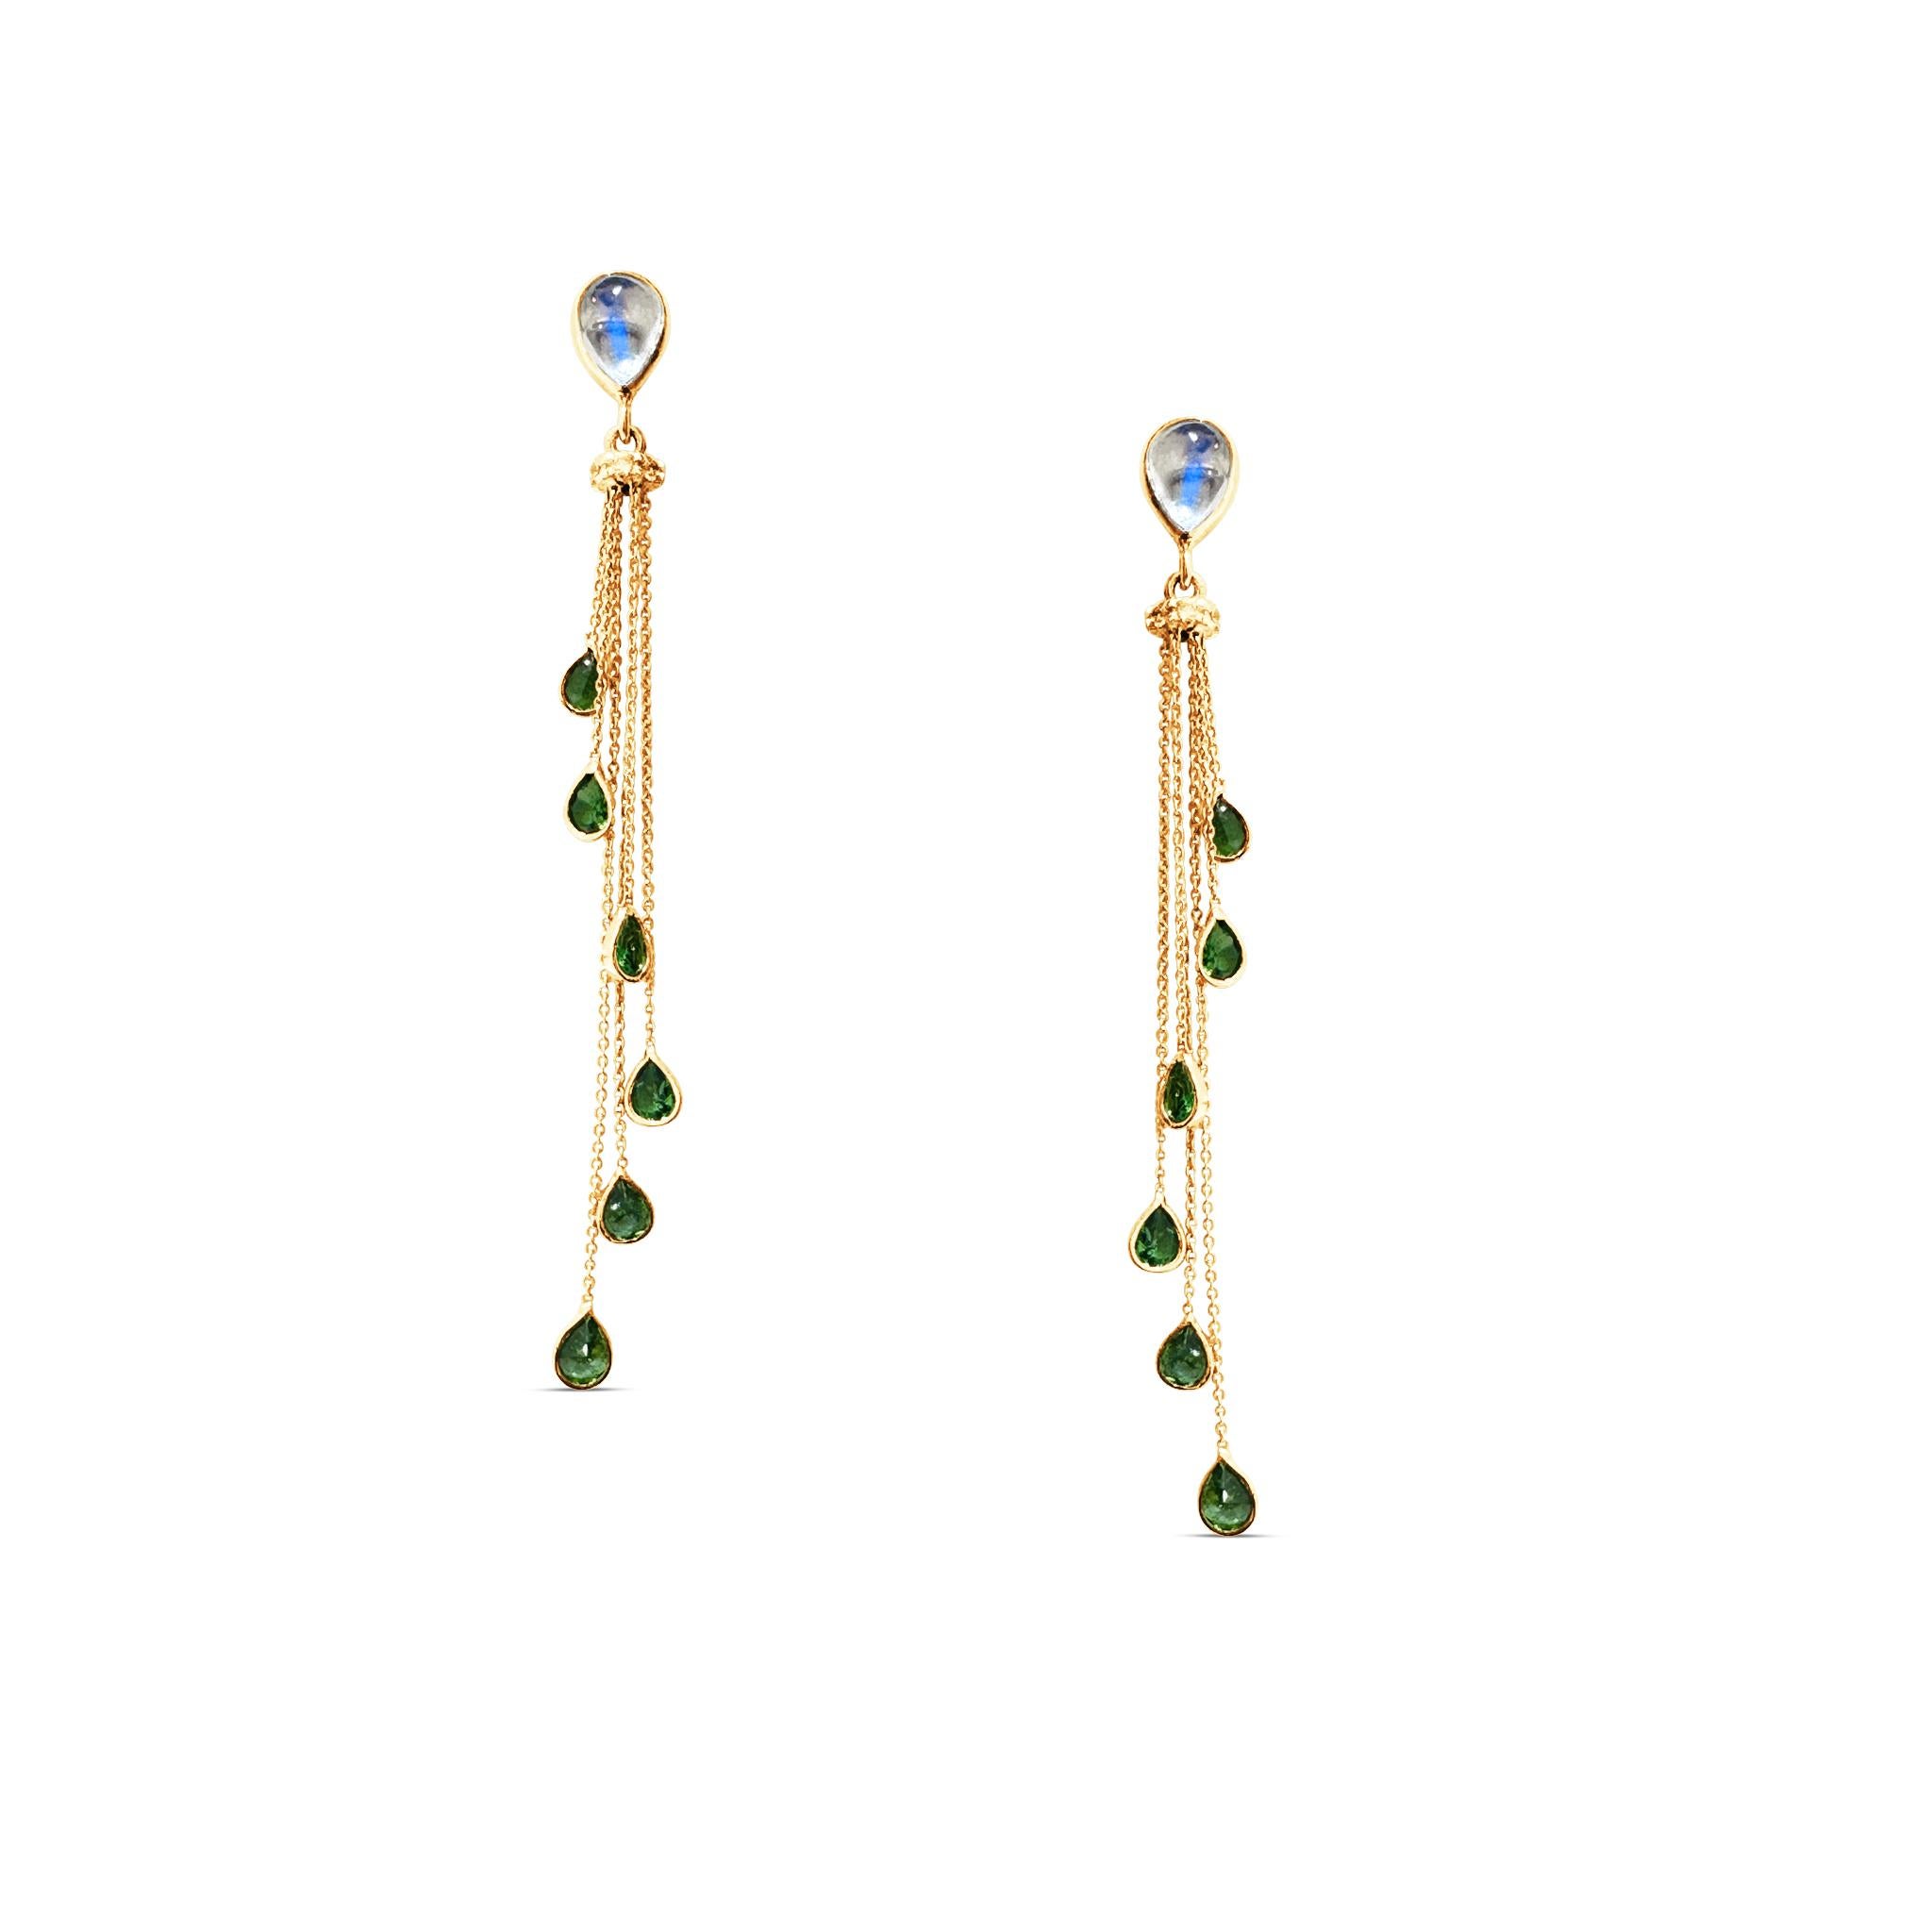 Tresor Beautiful Earring feature 2.47 carats of Gemstone & 0.07 carats Diamond. The Earring is an ode to the luxurious yet classic beauty with sparkly gemstones and feminine hues. Their contemporary and modern design make them perfect and versatile